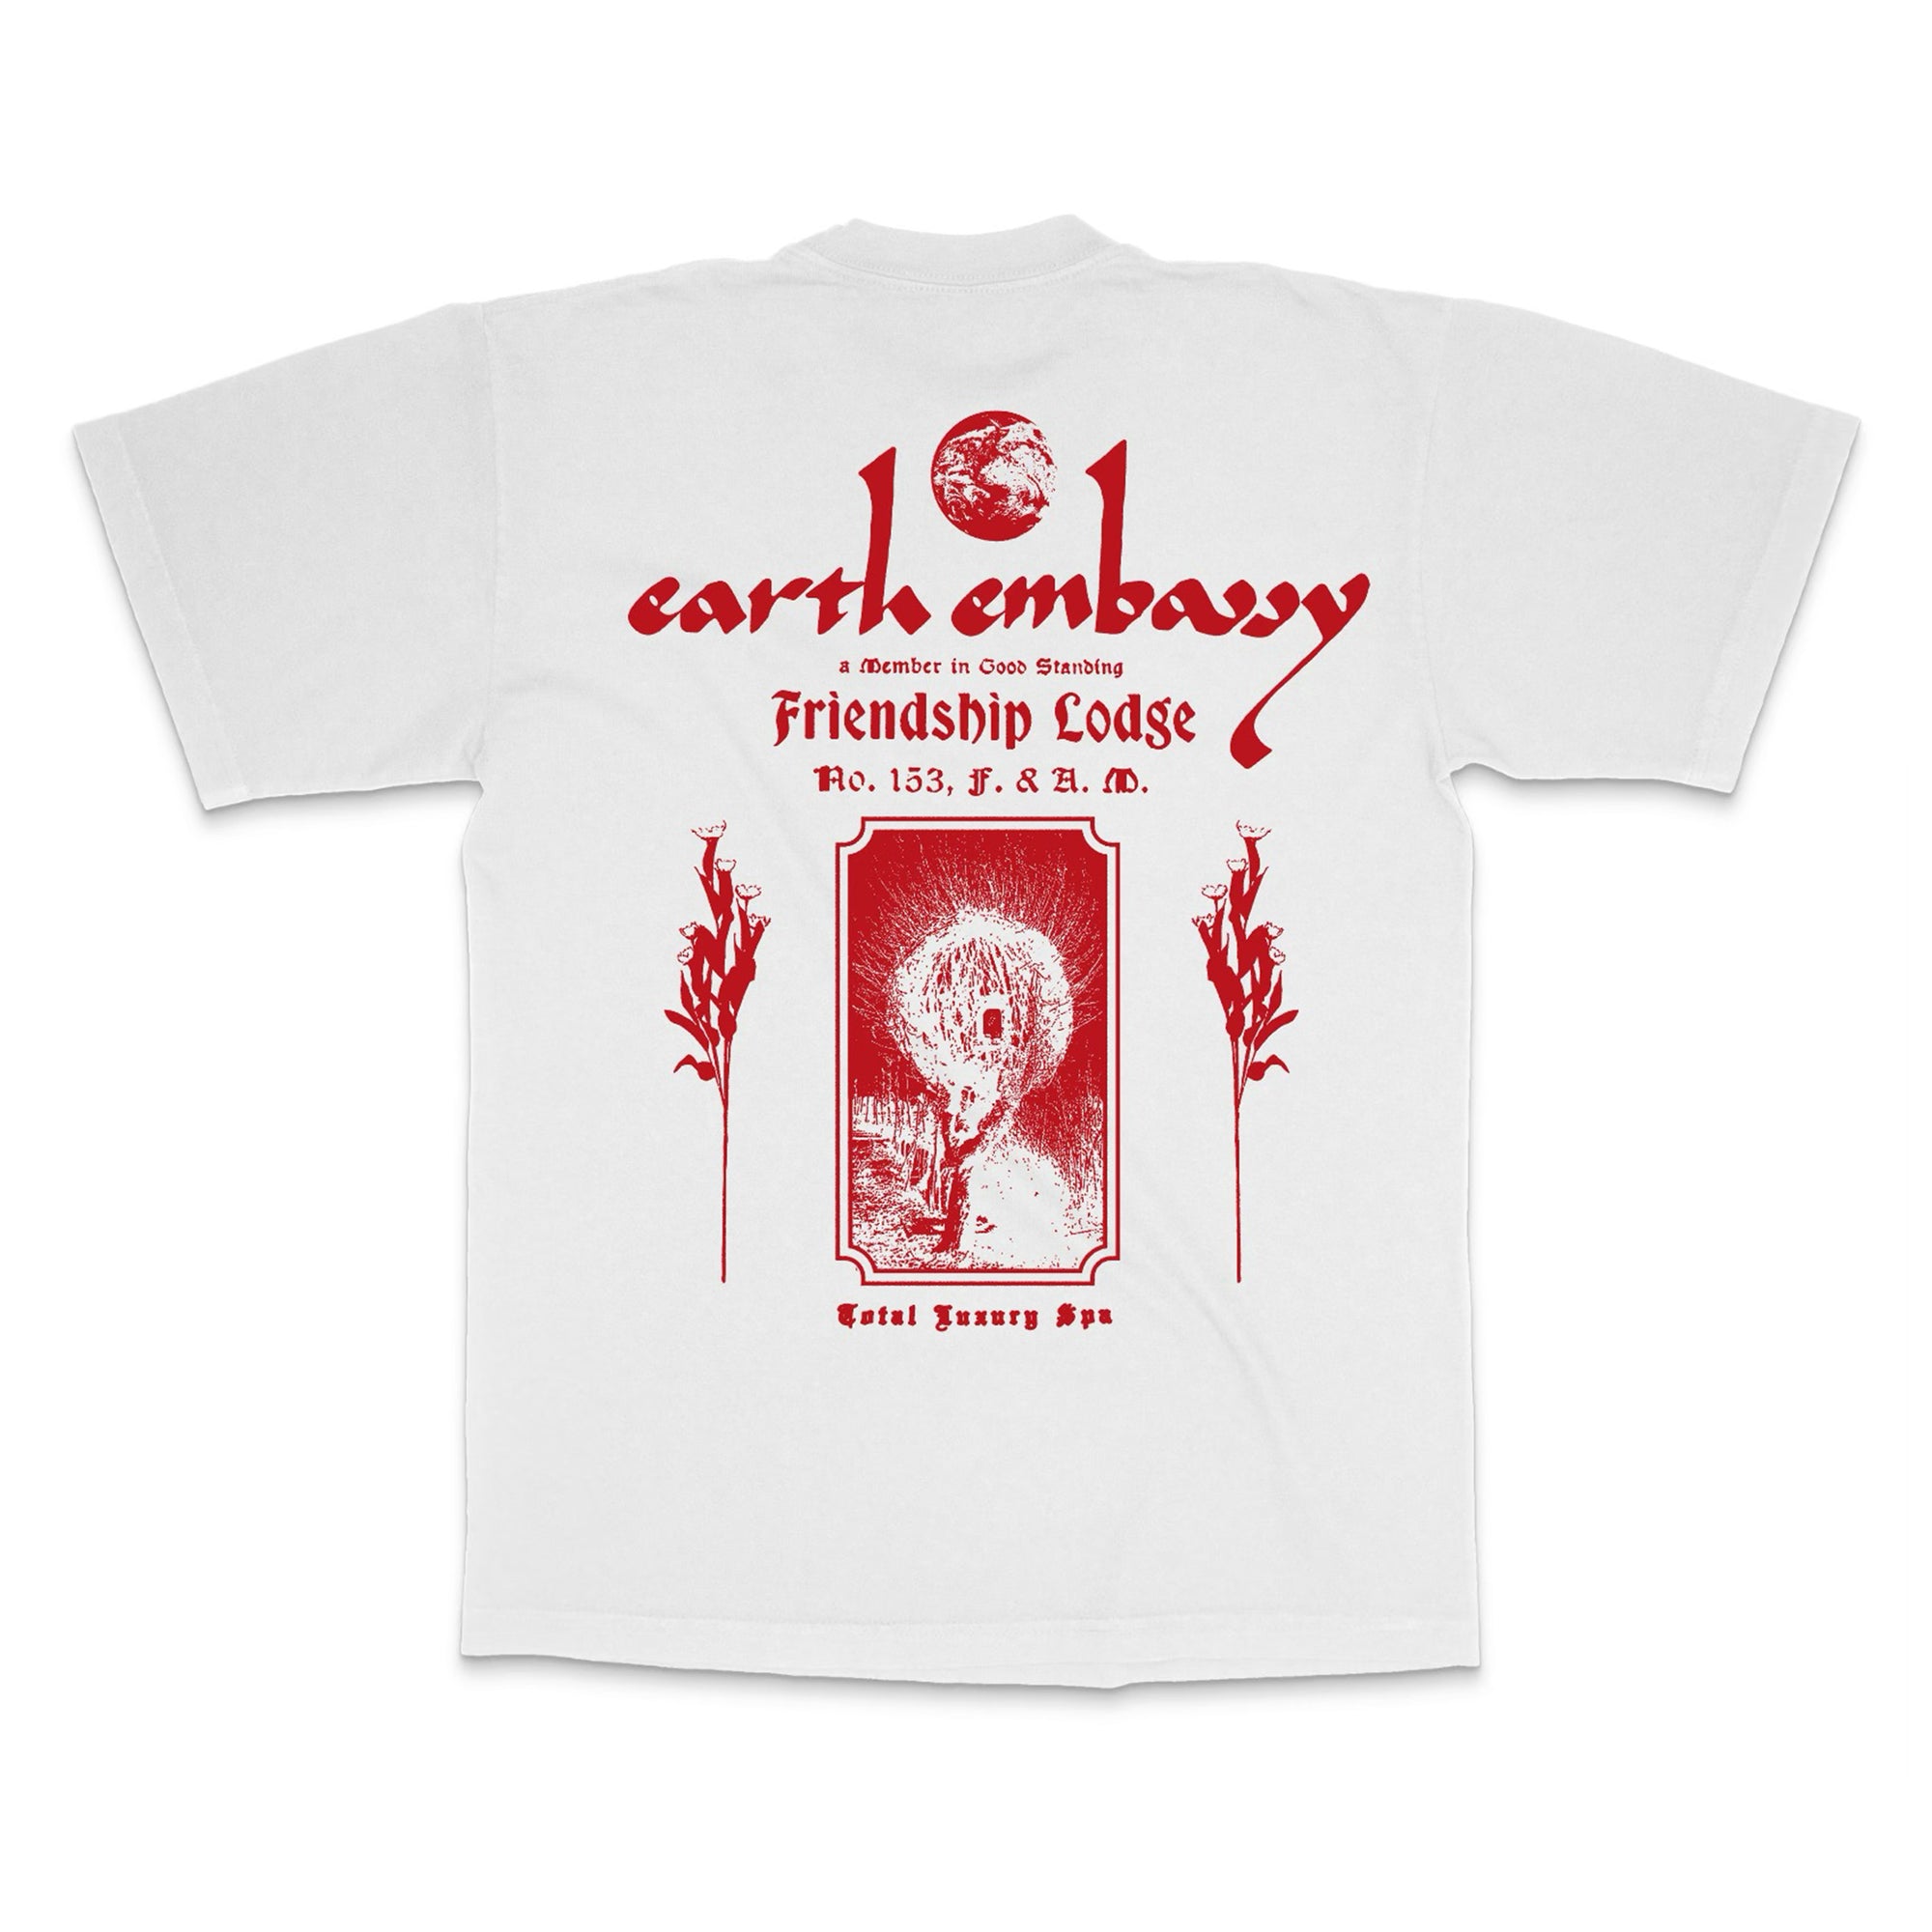 Total Luxury Spa - Men's Earth Embassy T-Shirt - (White) view 1